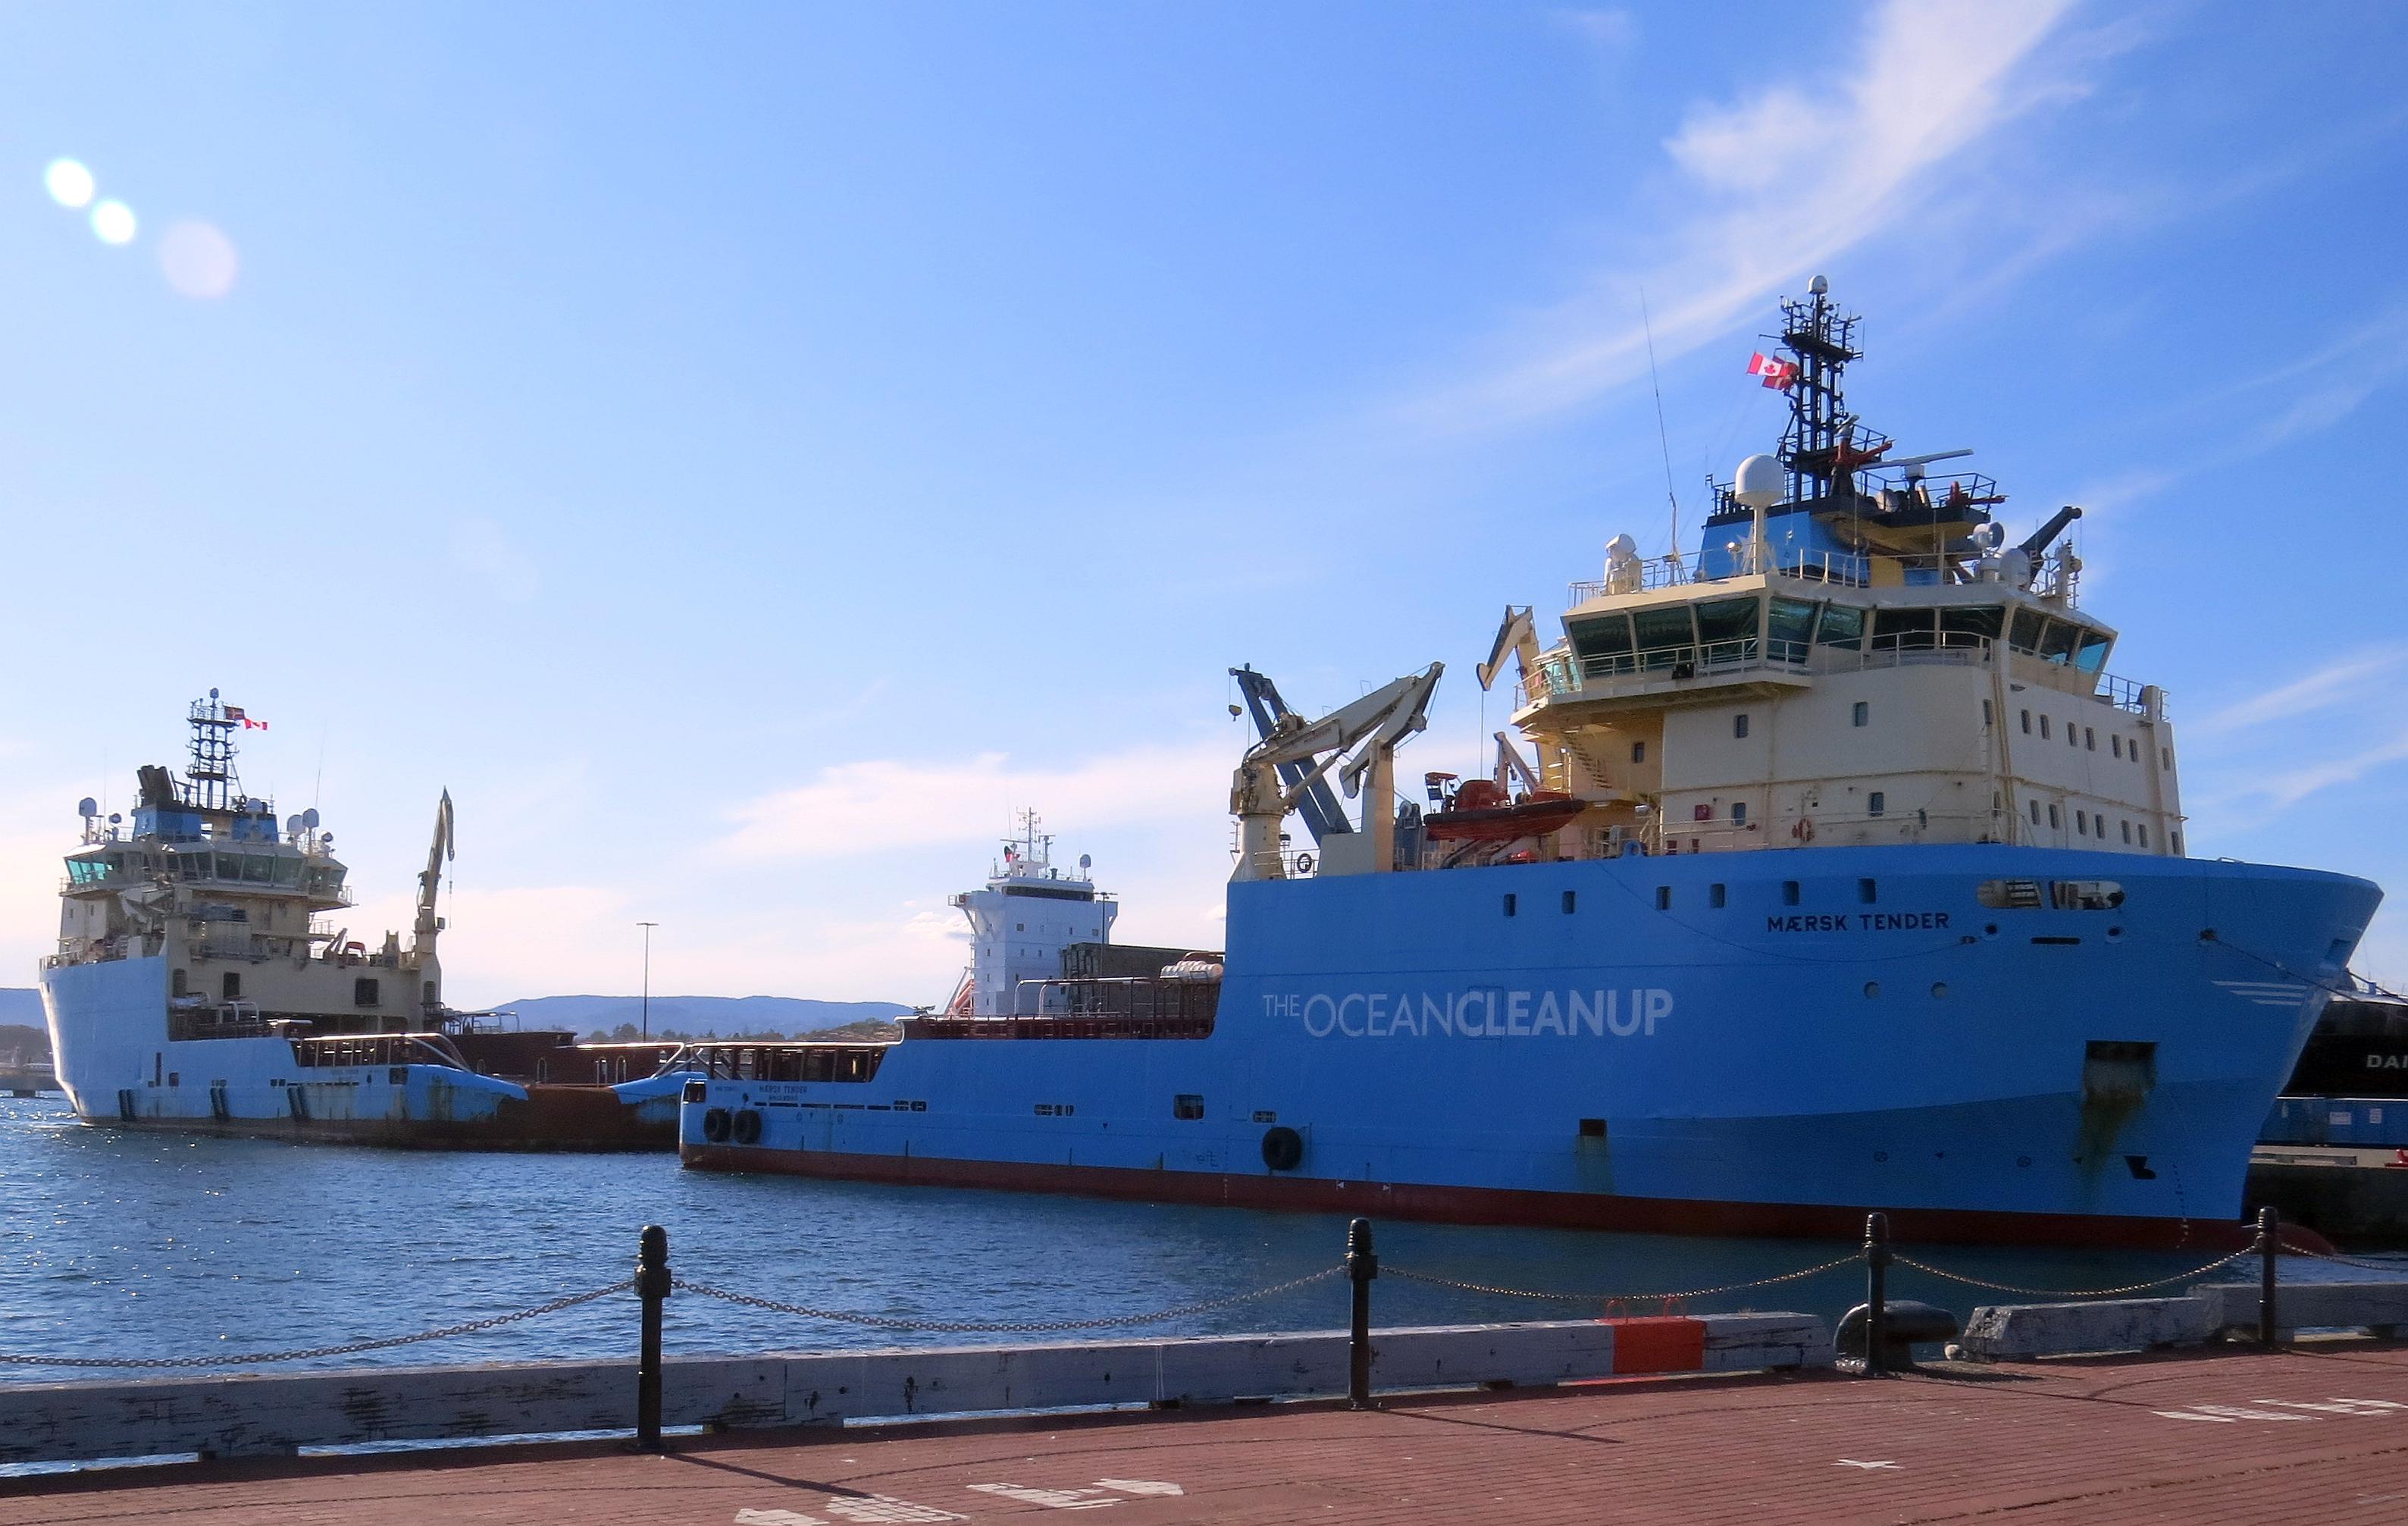 The Ocean Cleanup ships at Ogden Point, Victoria - July 22, 2021.